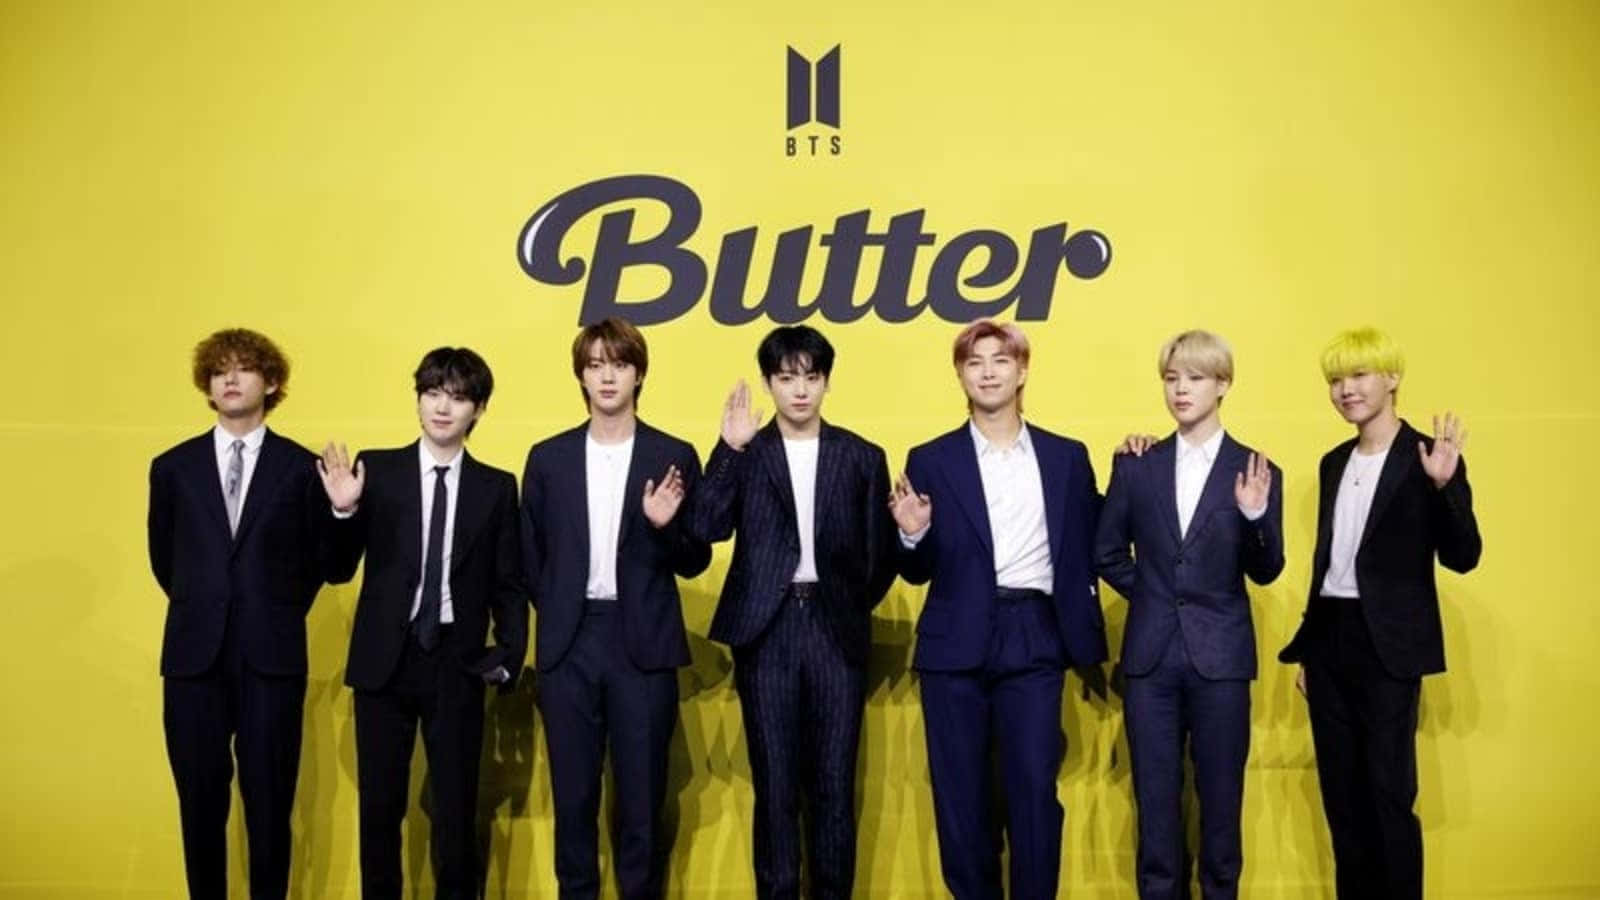 BTS Drops Their New Single, "BUTTER"